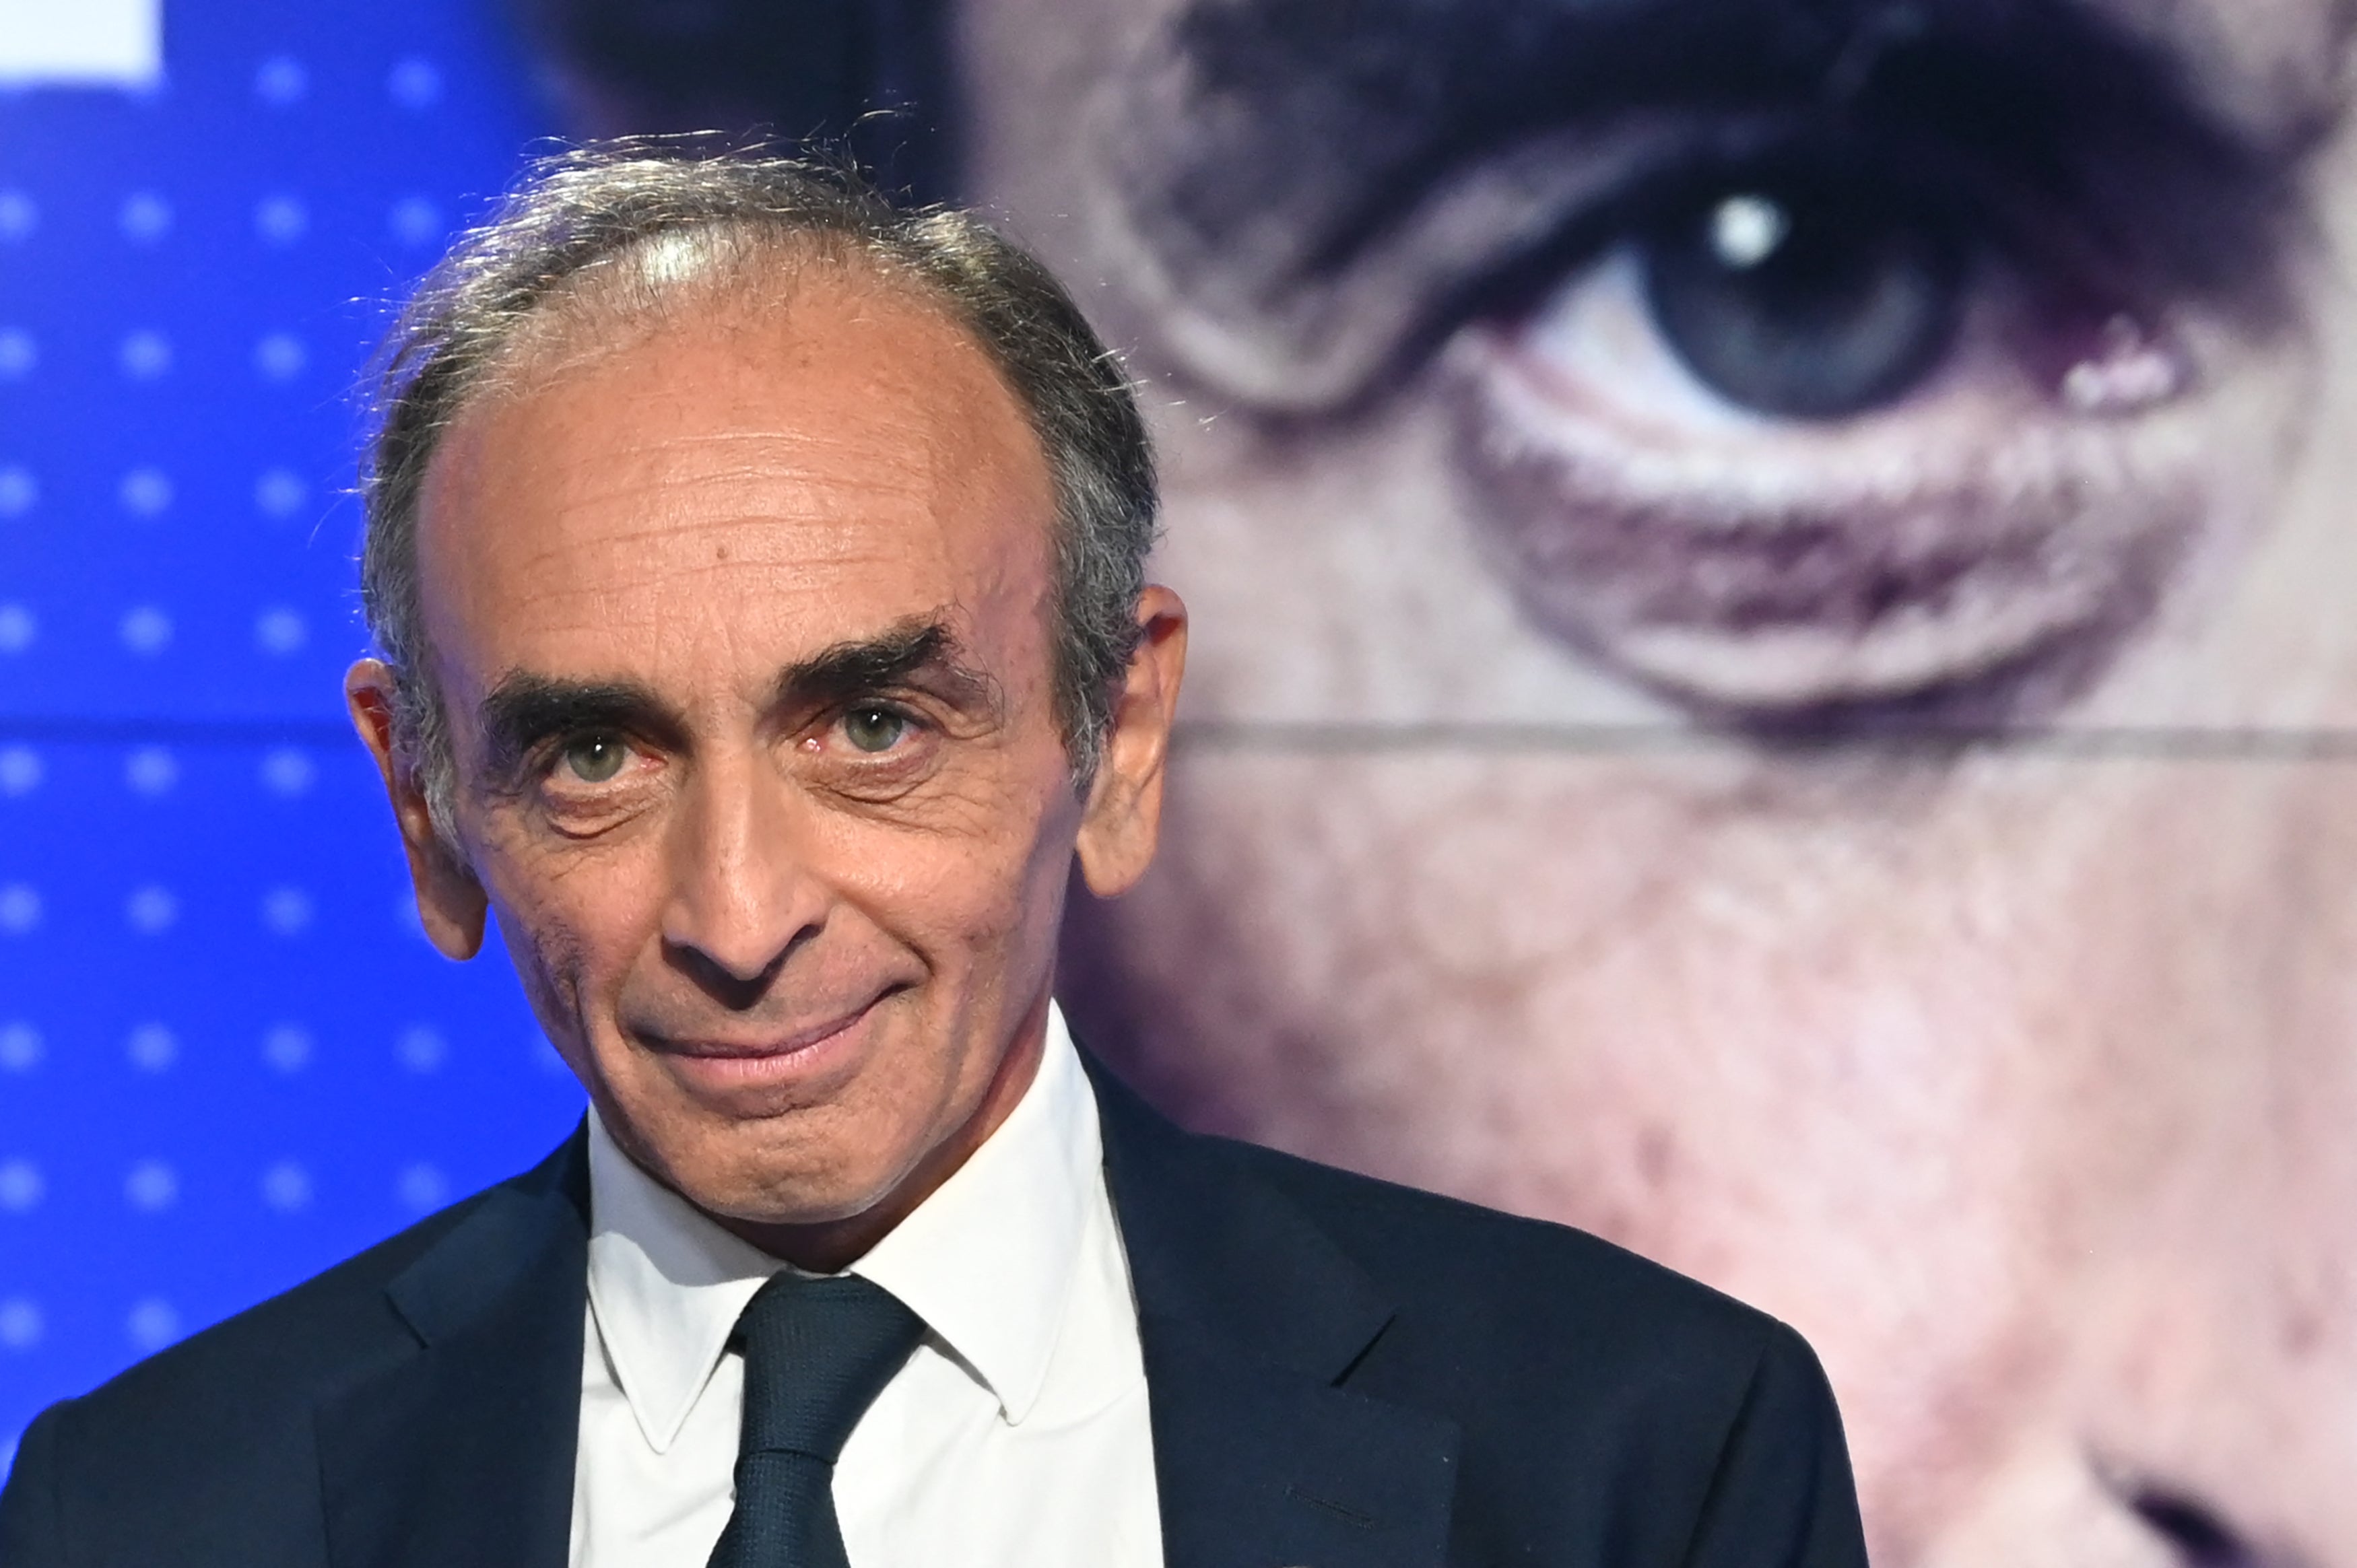 Zemmour has yet to announce a run